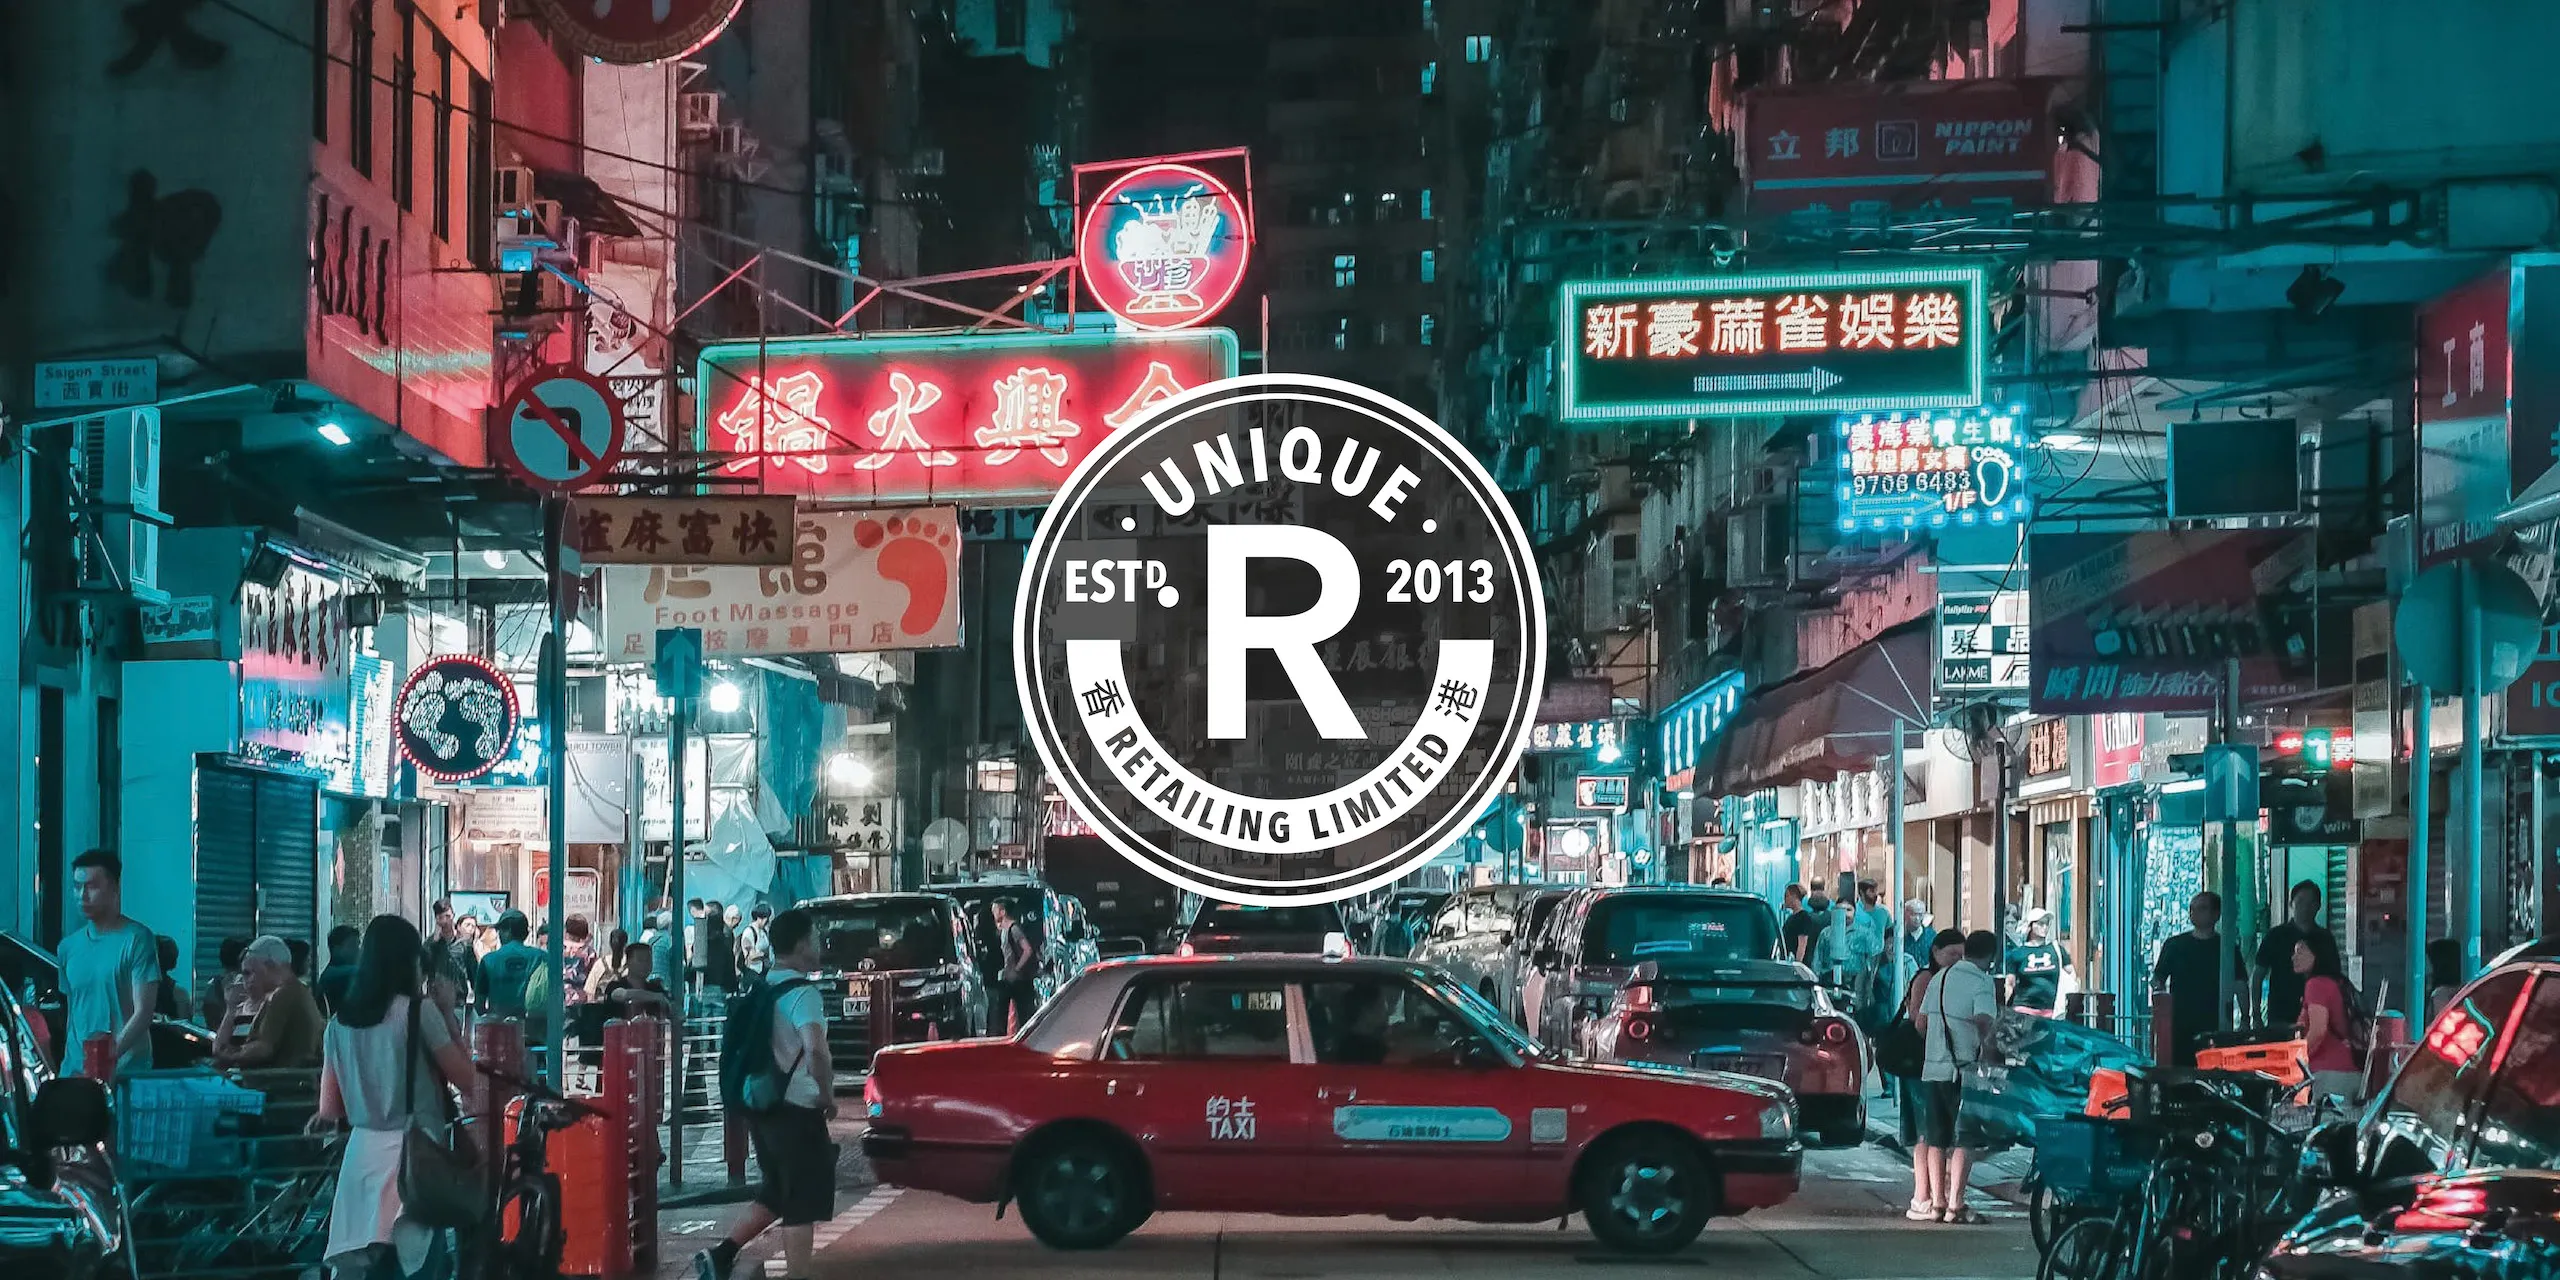 Unique Retailing rondel logo in white on a background of a neon lit Hong Kong street at night with a red taxi crossing to the right.